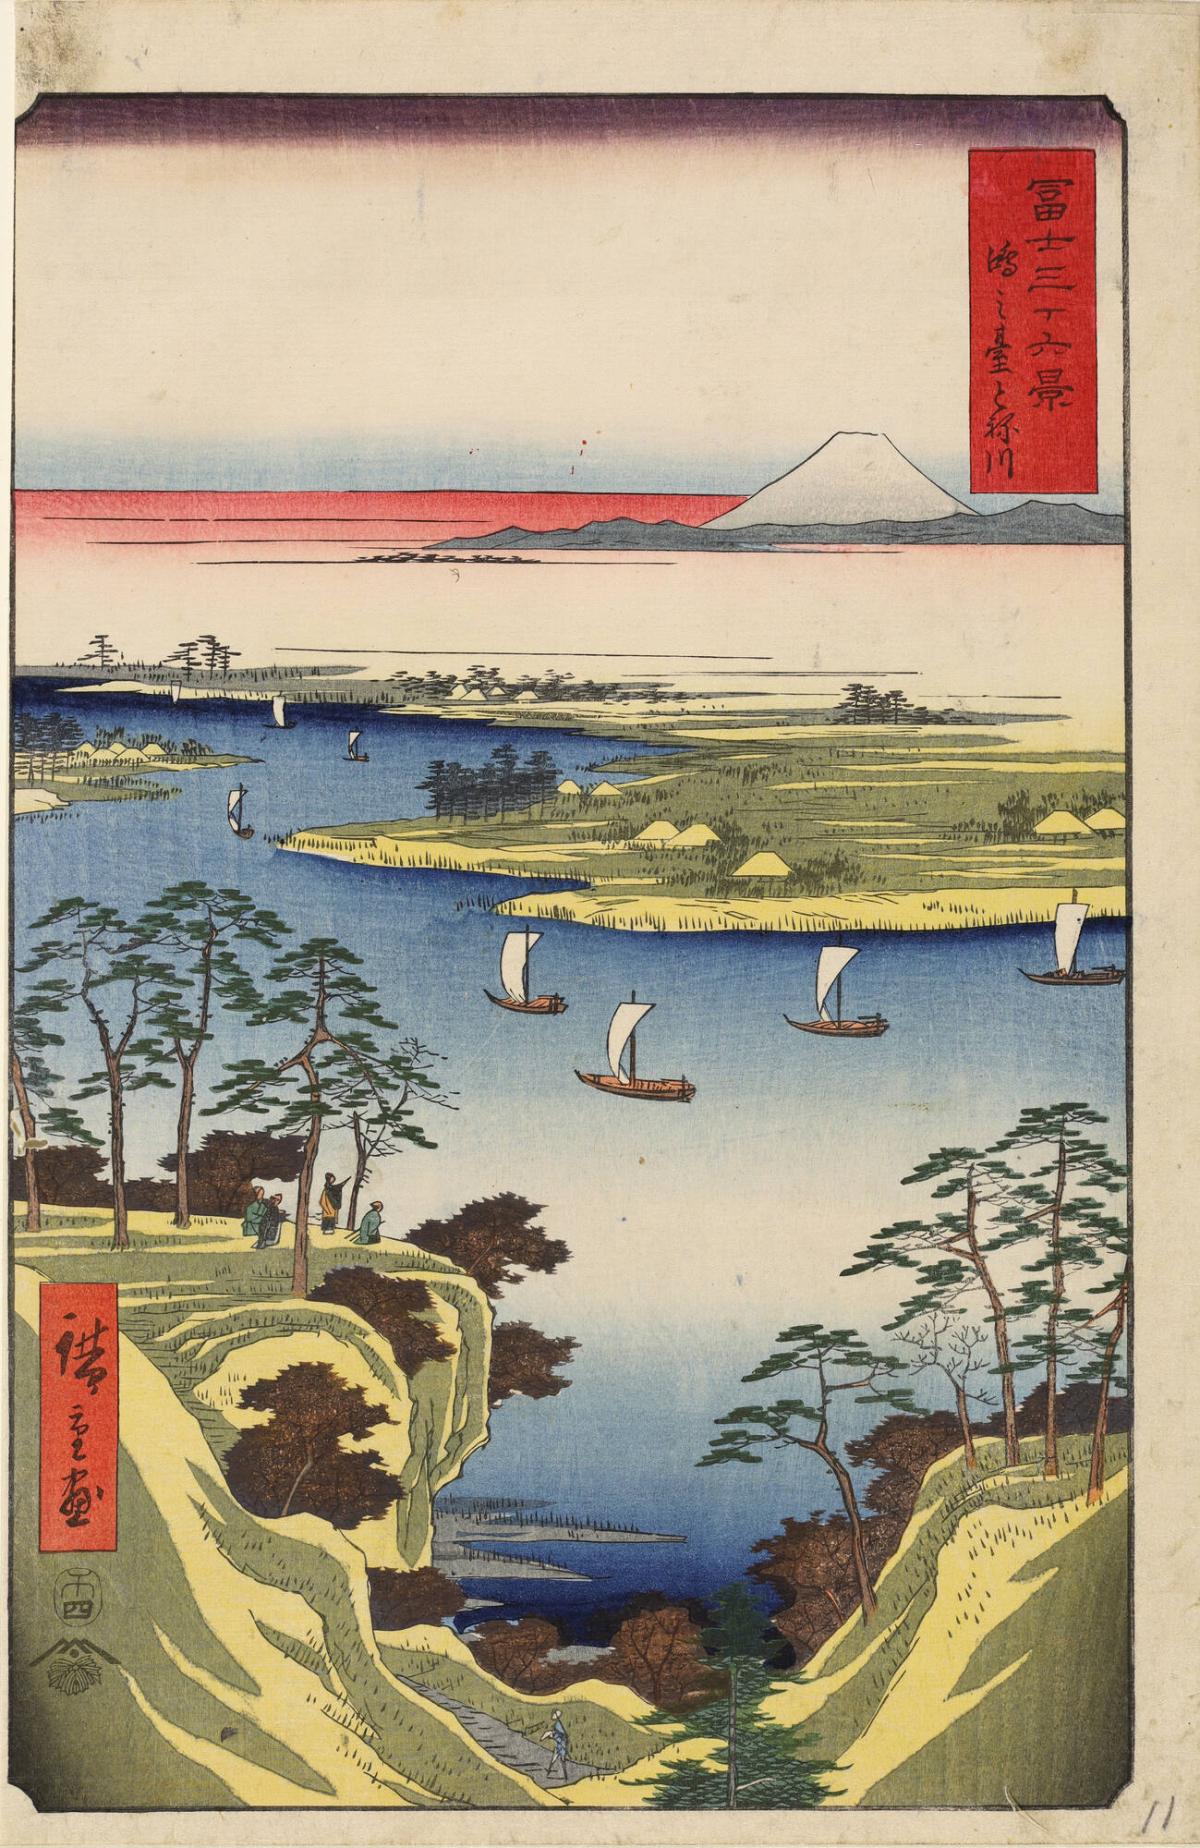 The Hill of the Wild Goose by the Tone River, no. 11 from the series Thirty-six Views of Mt. Fuji